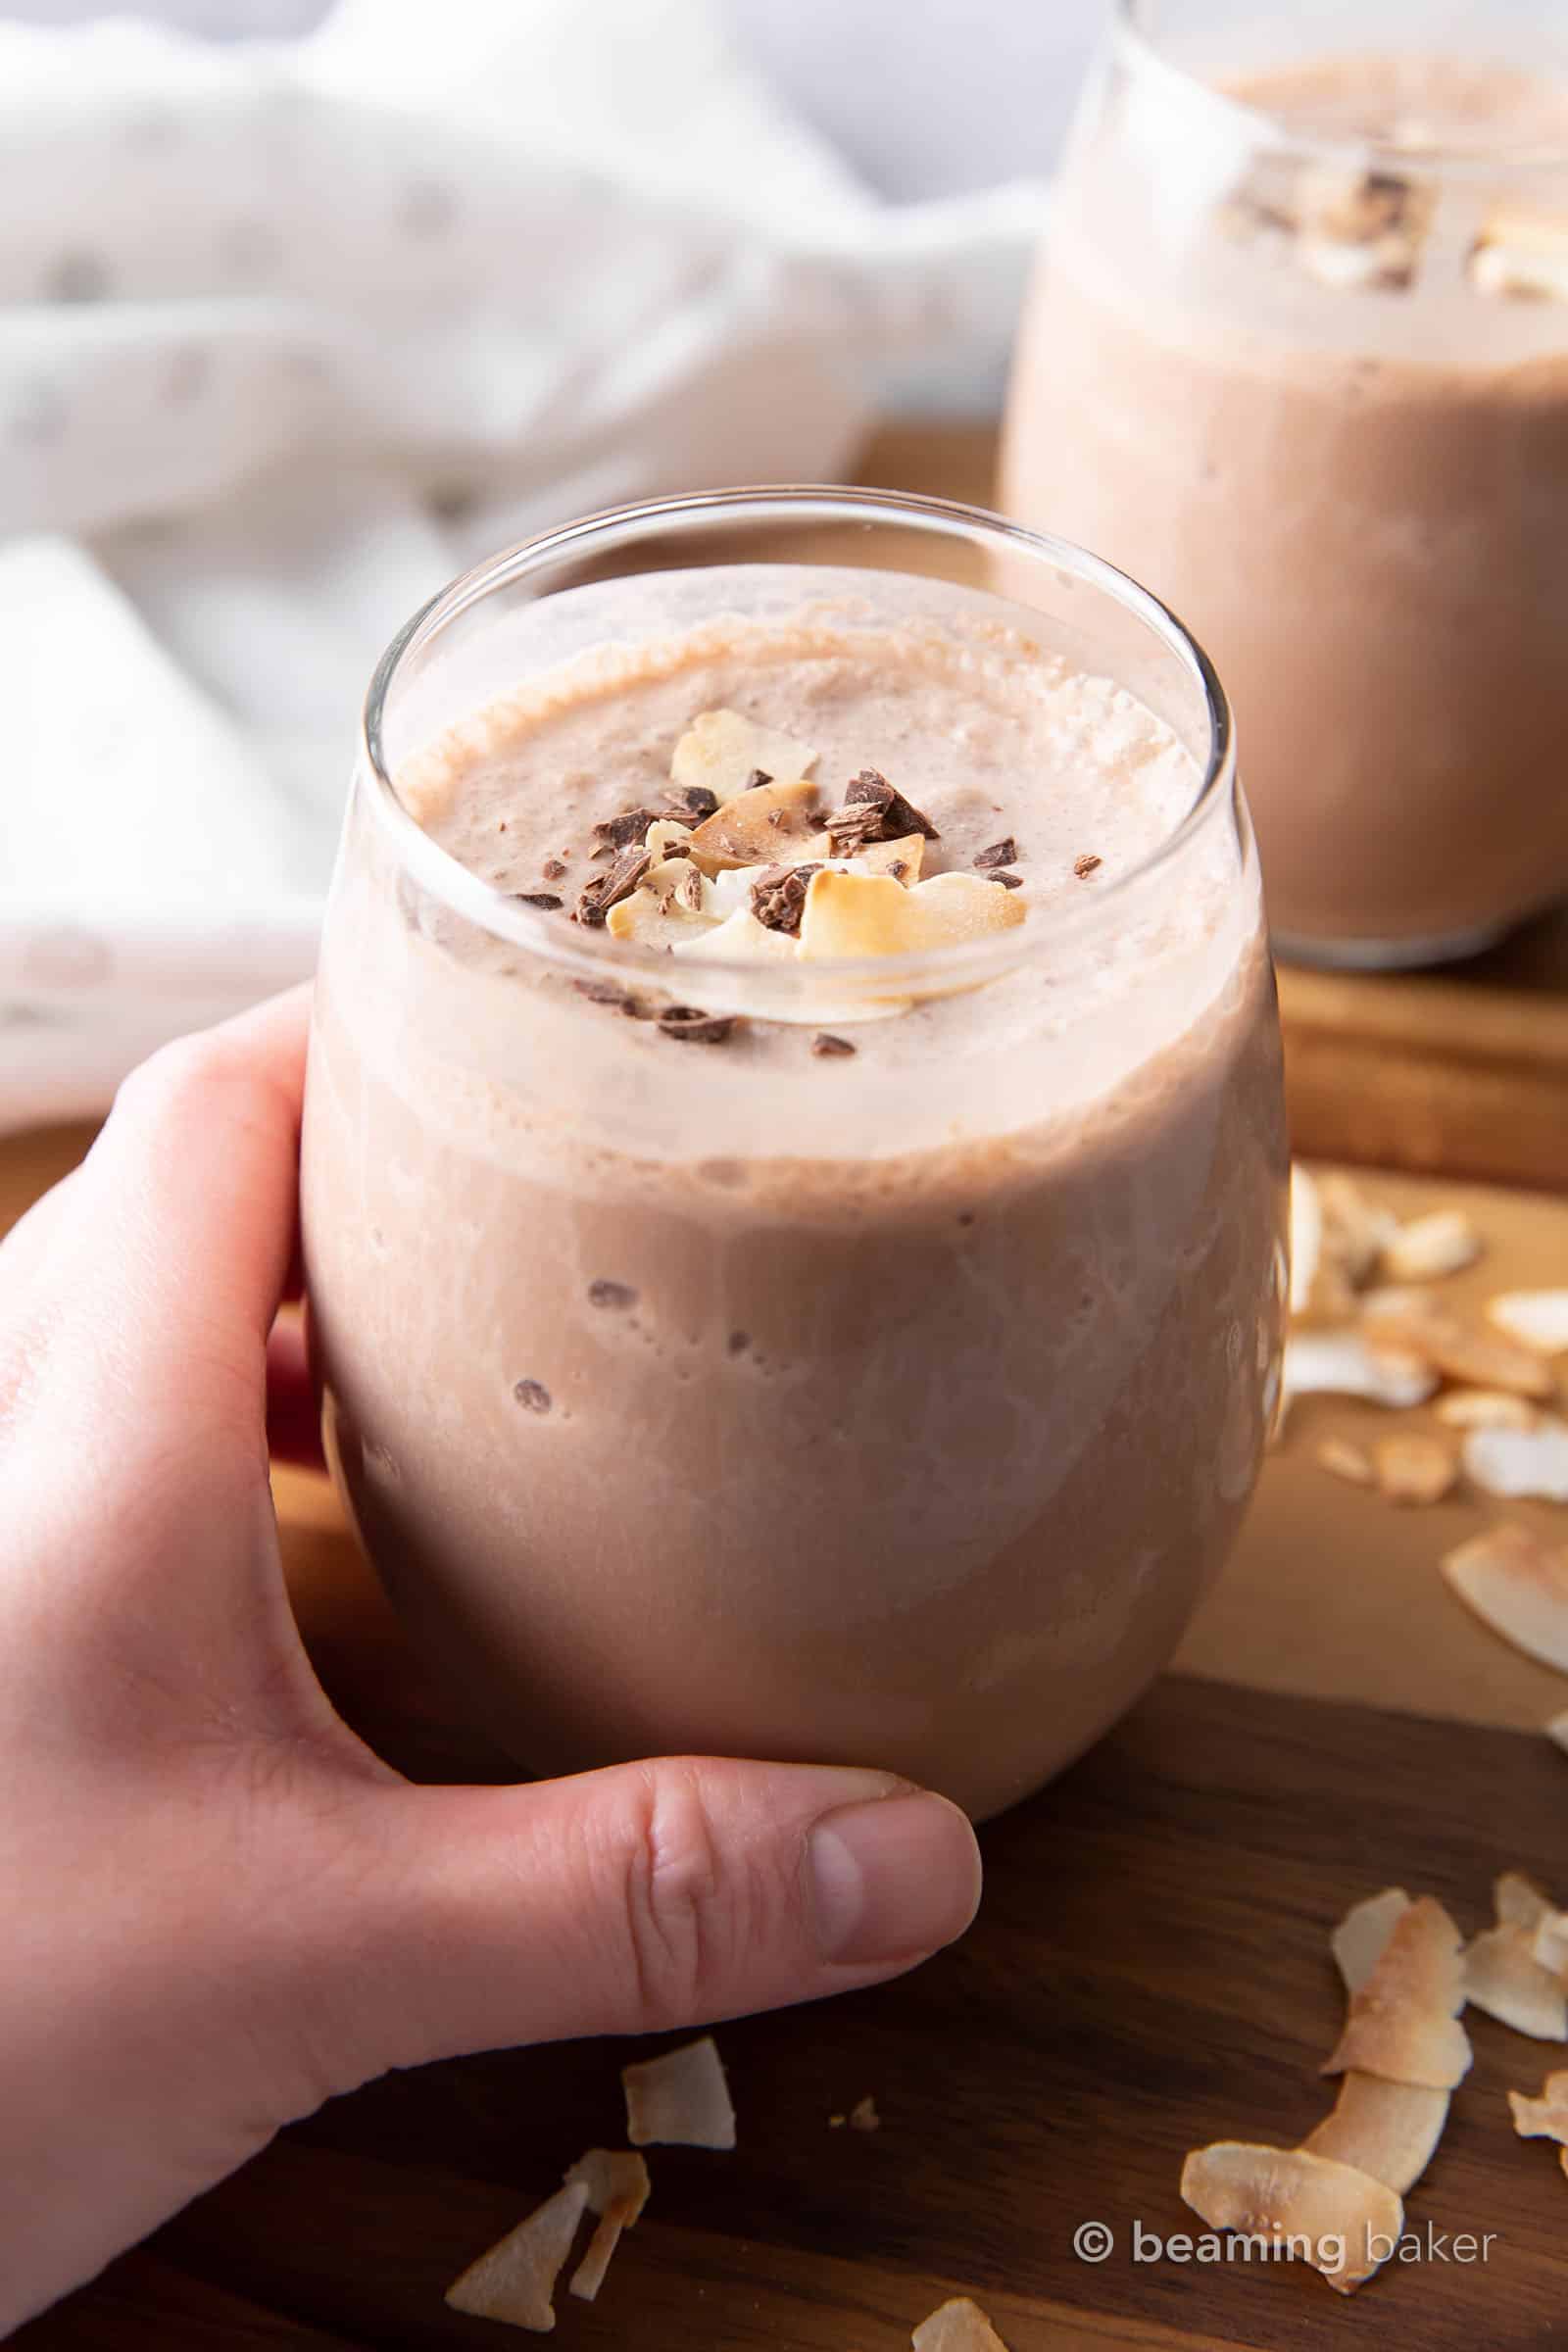 Coconut Chocolate Keto Smoothie: this keto protein smoothie recipe is delicious, easy to make & Low Carb! Just 6 ingredients for 12 grams of protein and only 3 net carbs. #LowCarb #HighProtein #Vegan #Smoothie | Recipe at BeamingBaker.com